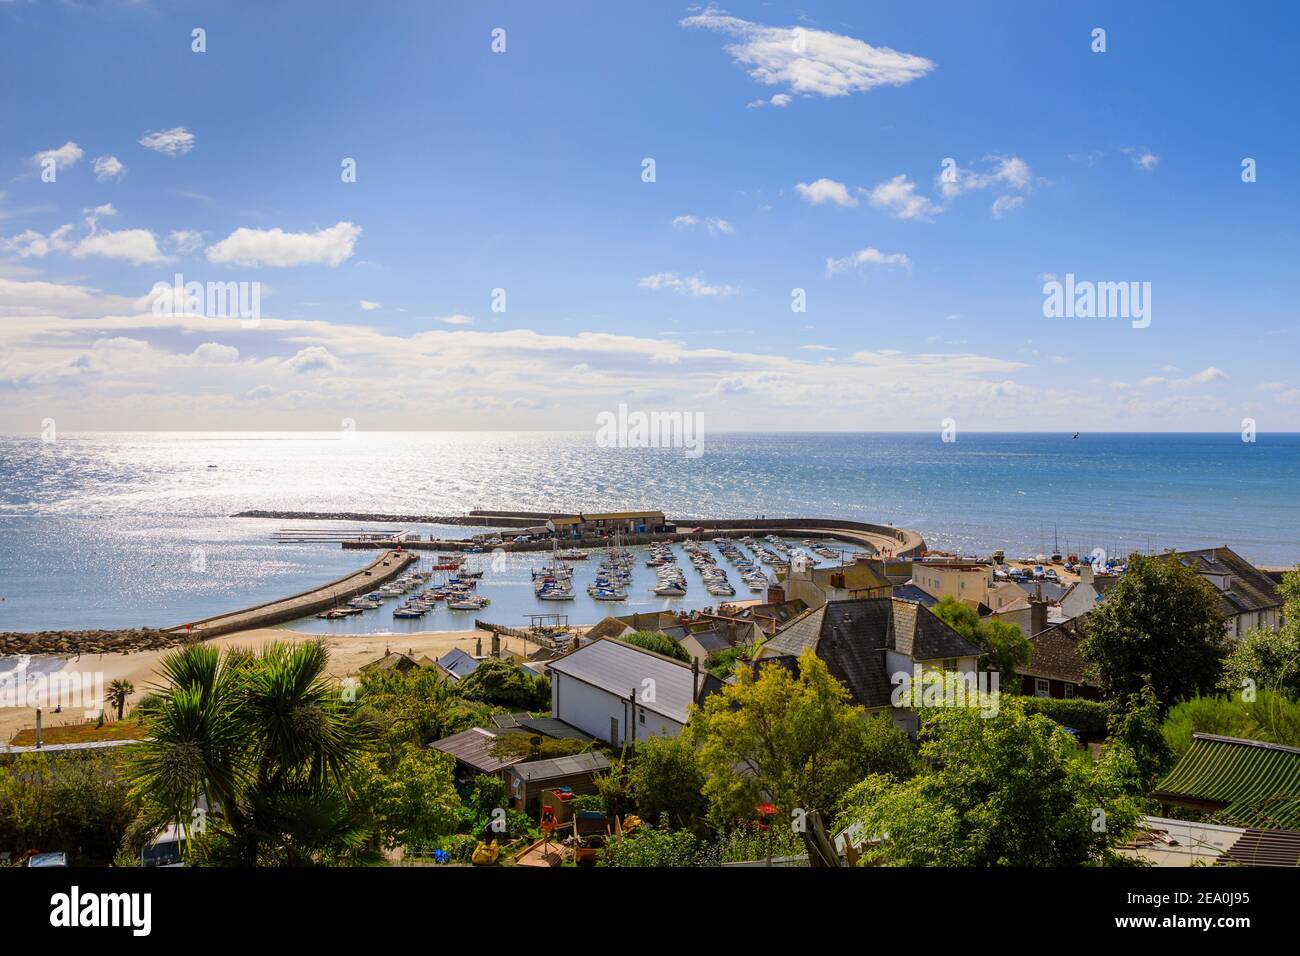 Panoramic view of the Cobb, a harbour at Lyme Regis, a West Dorset town, England, on Lyme Bay on the English Channel coast at the Dorset–Devon border. Stock Photo